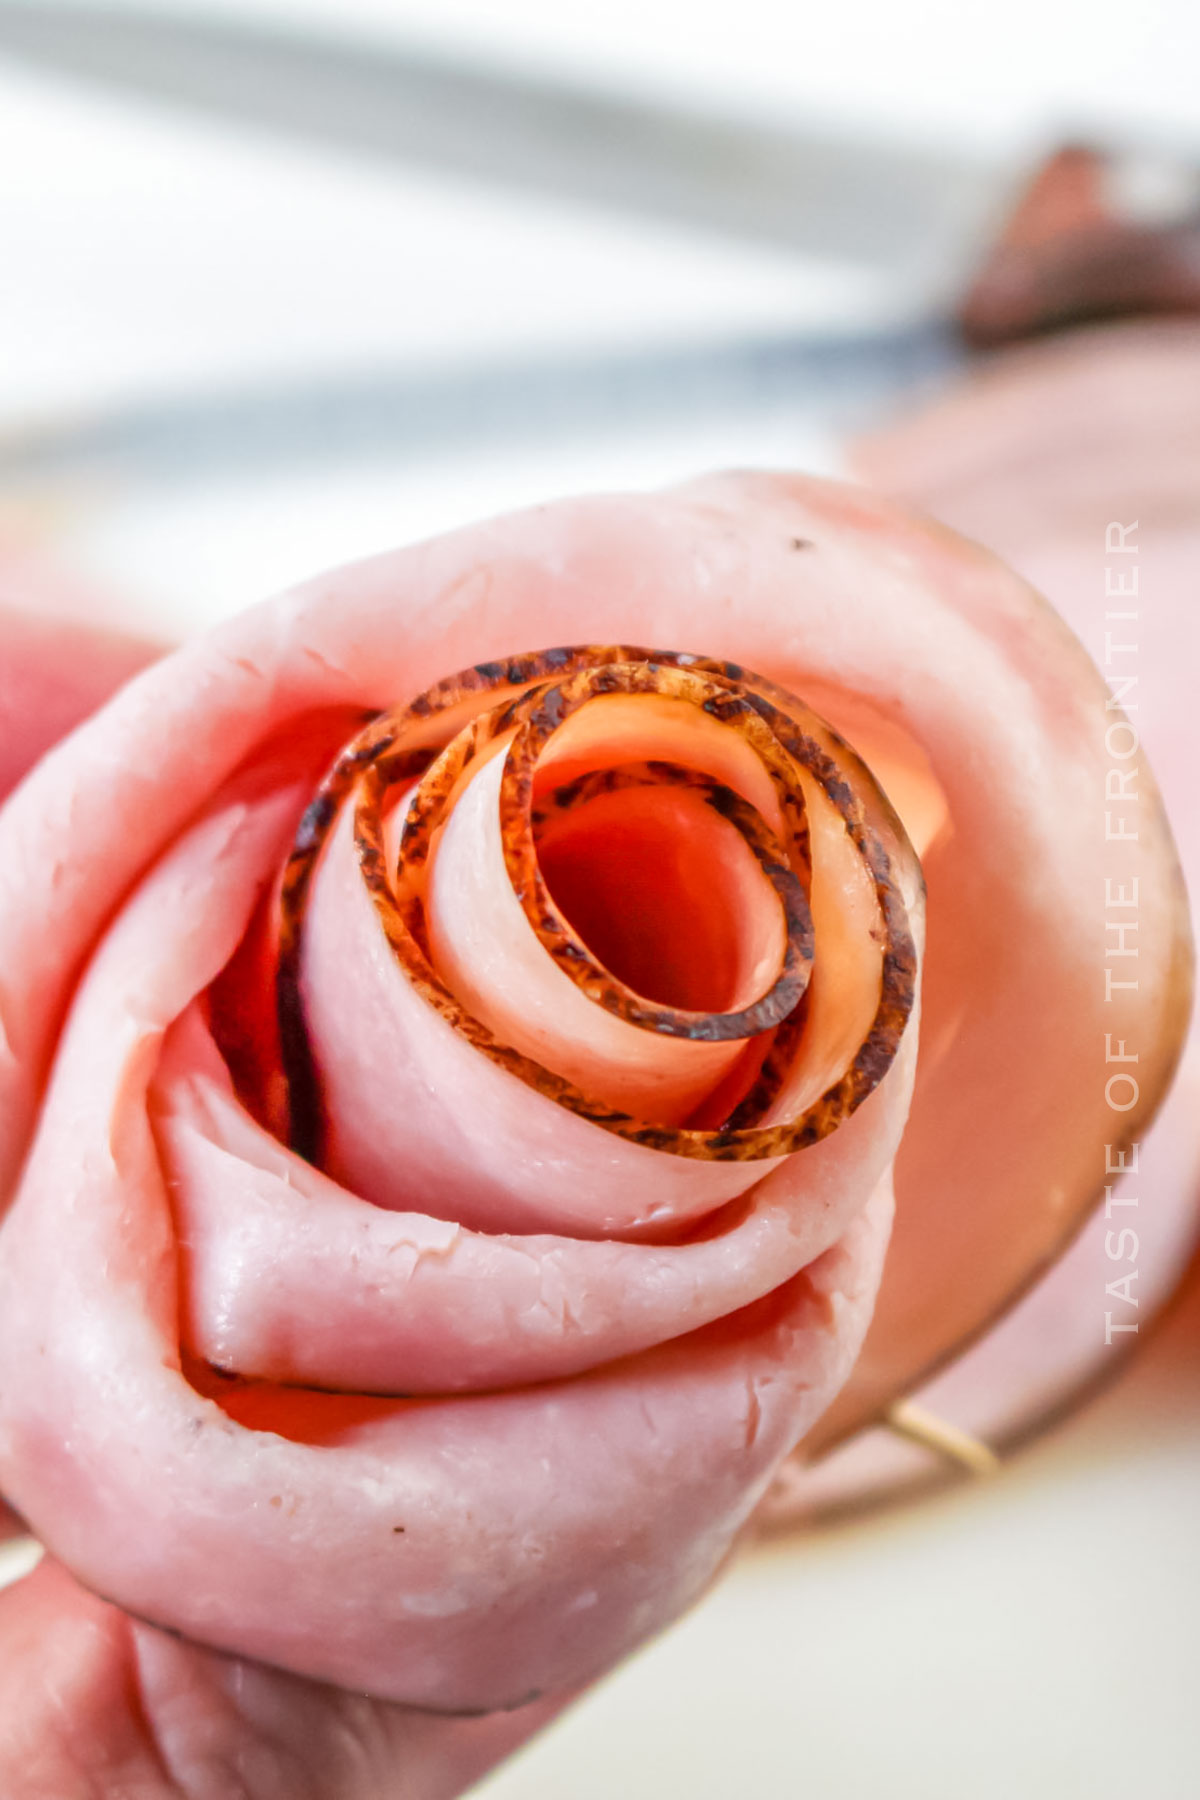 making roses out of lunch meat